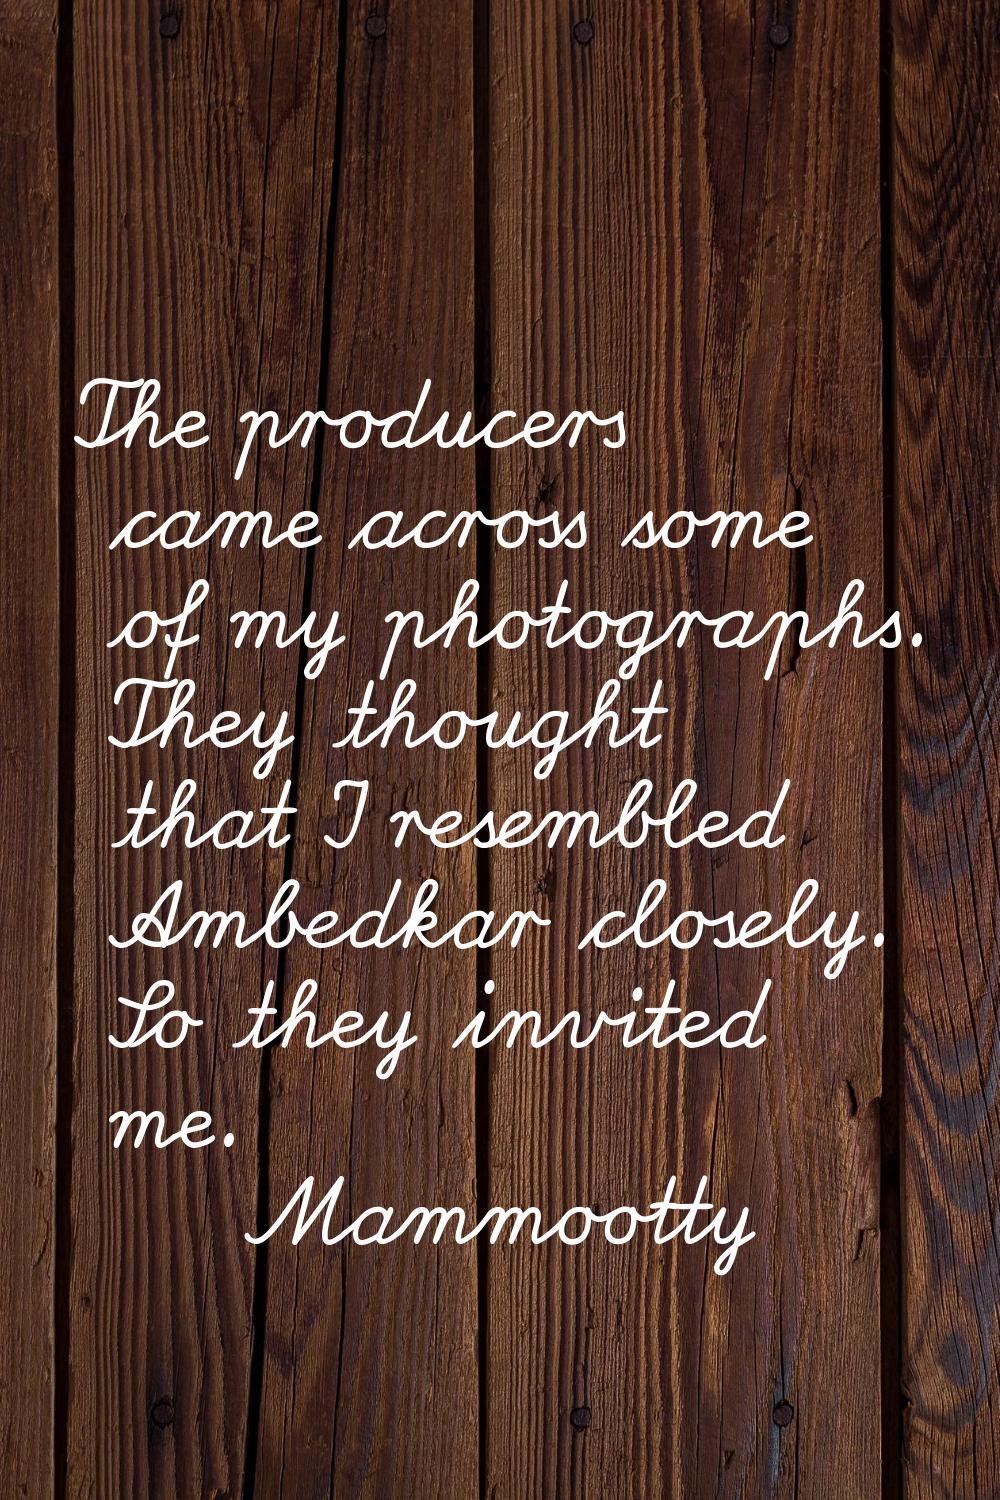 The producers came across some of my photographs. They thought that I resembled Ambedkar closely. S